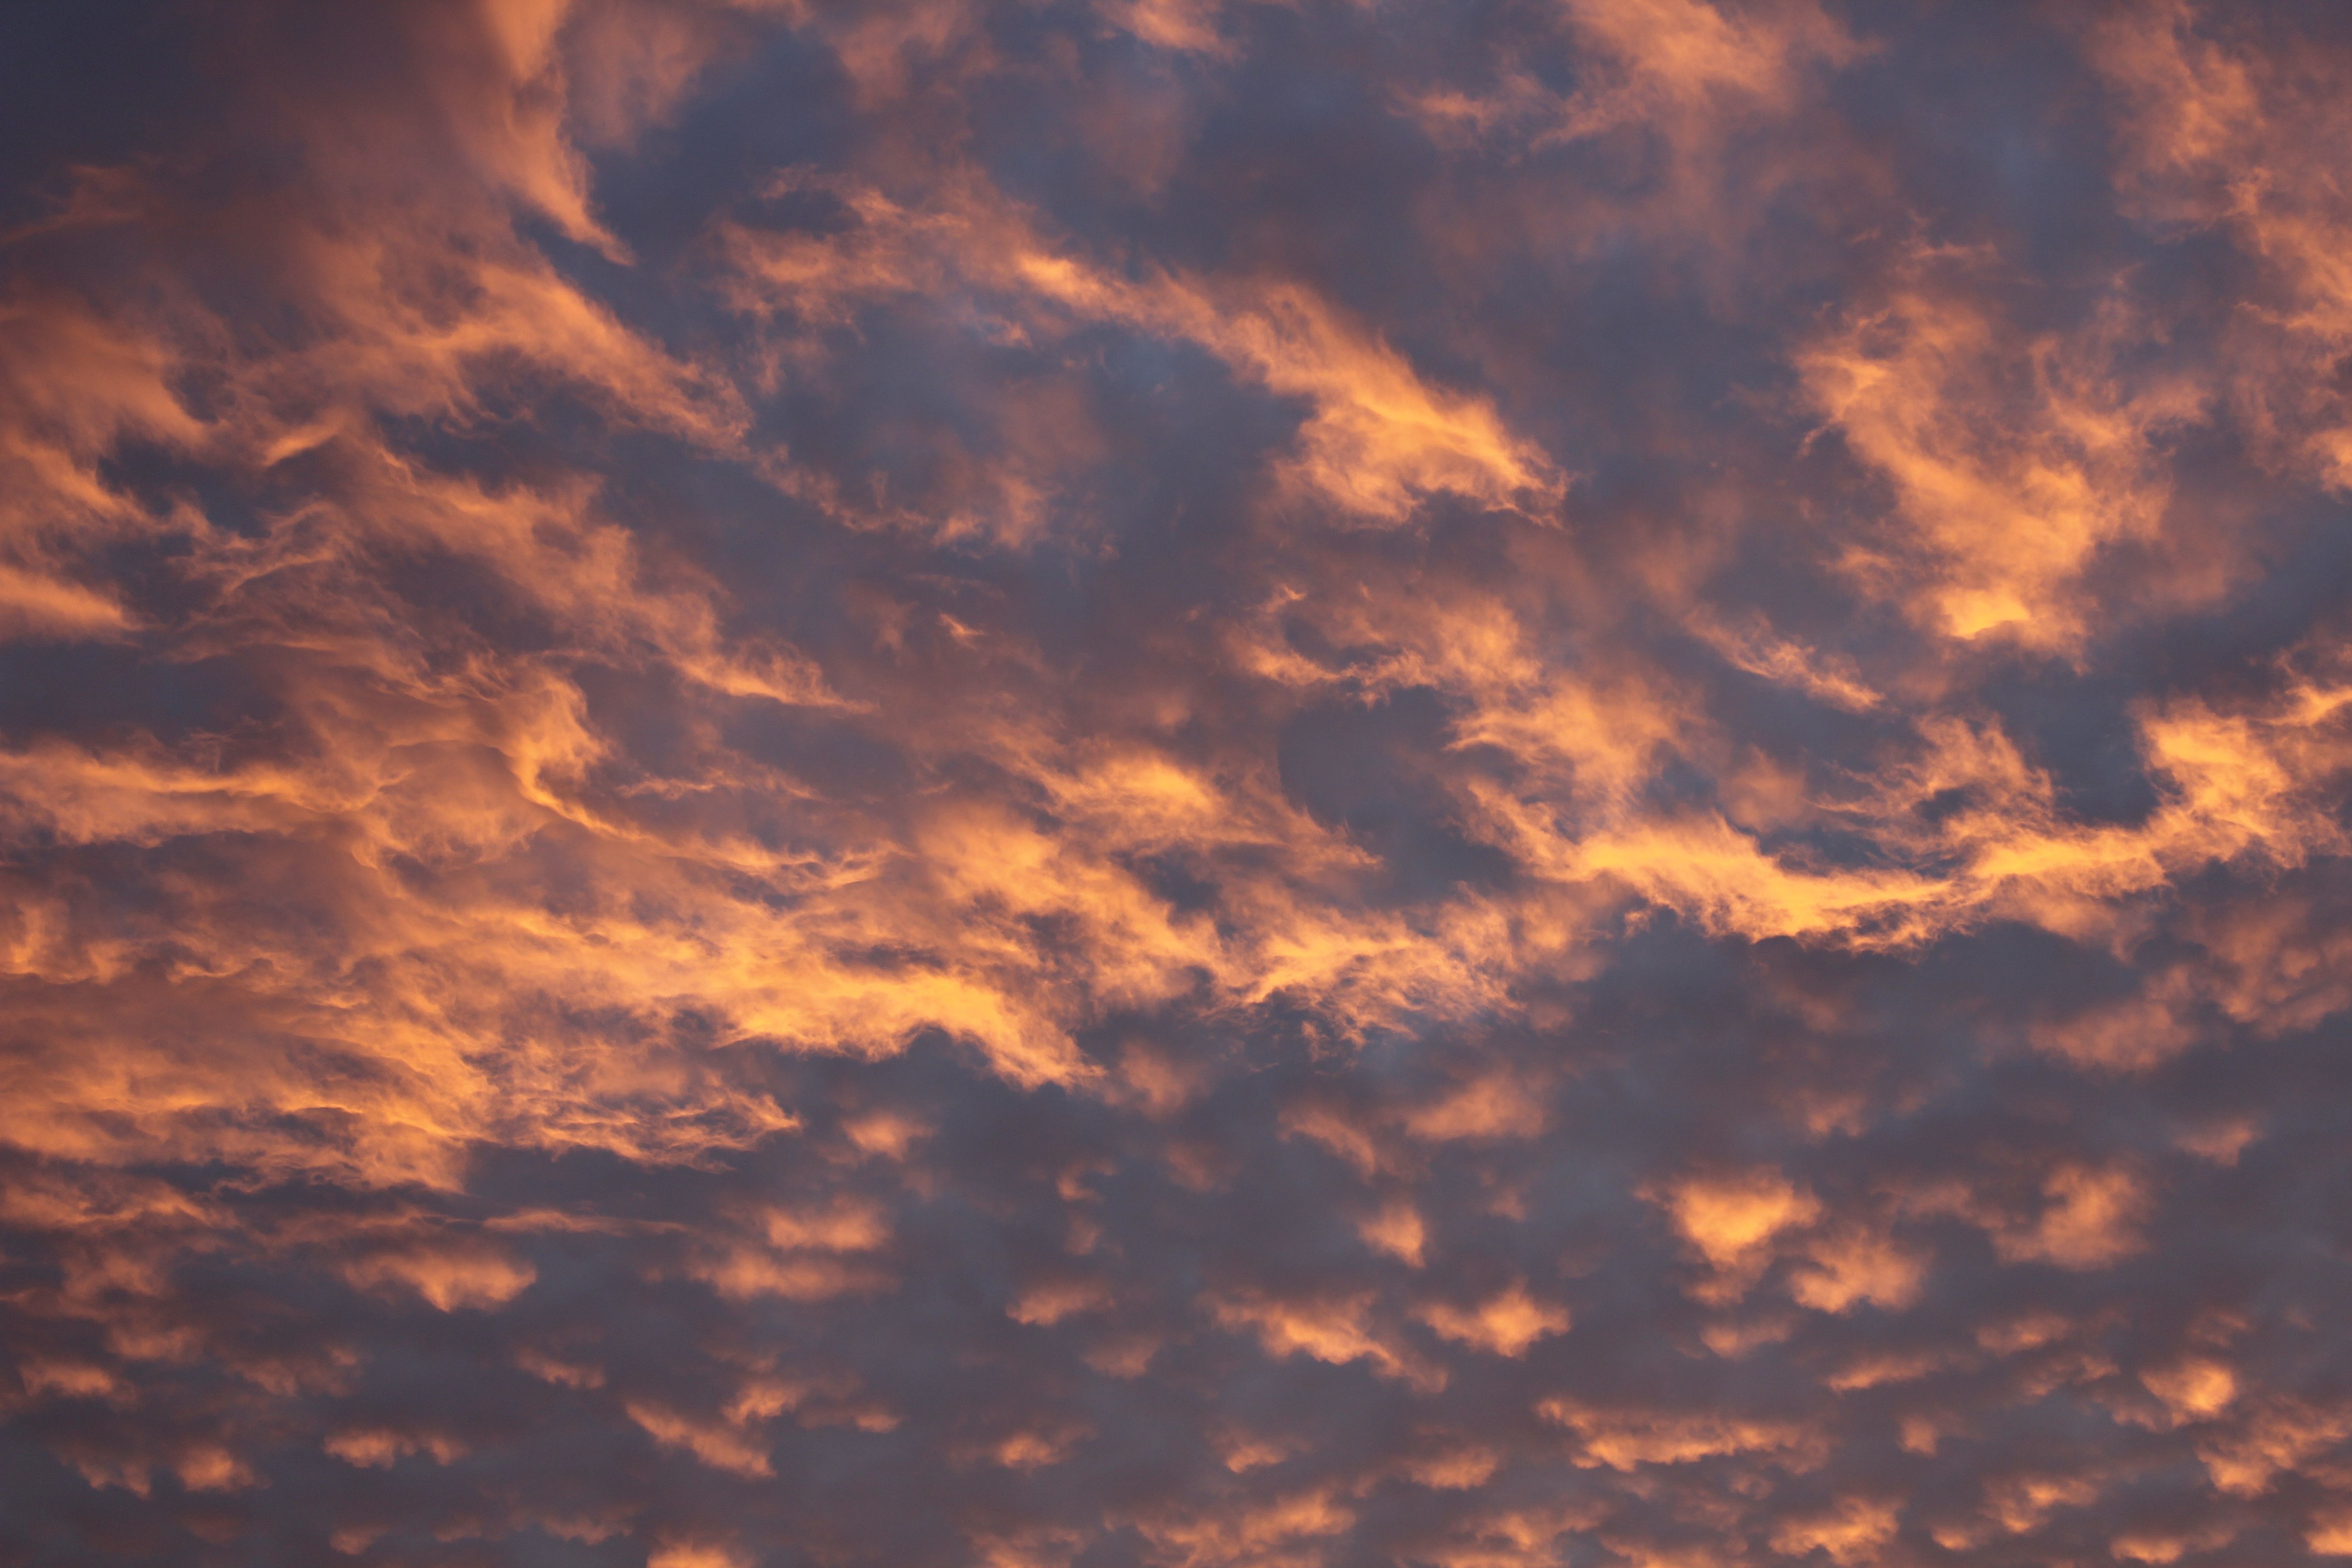 Download wallpaper 5184x3456 sky, clouds, evening, pink, yellow, atmospheric HD background